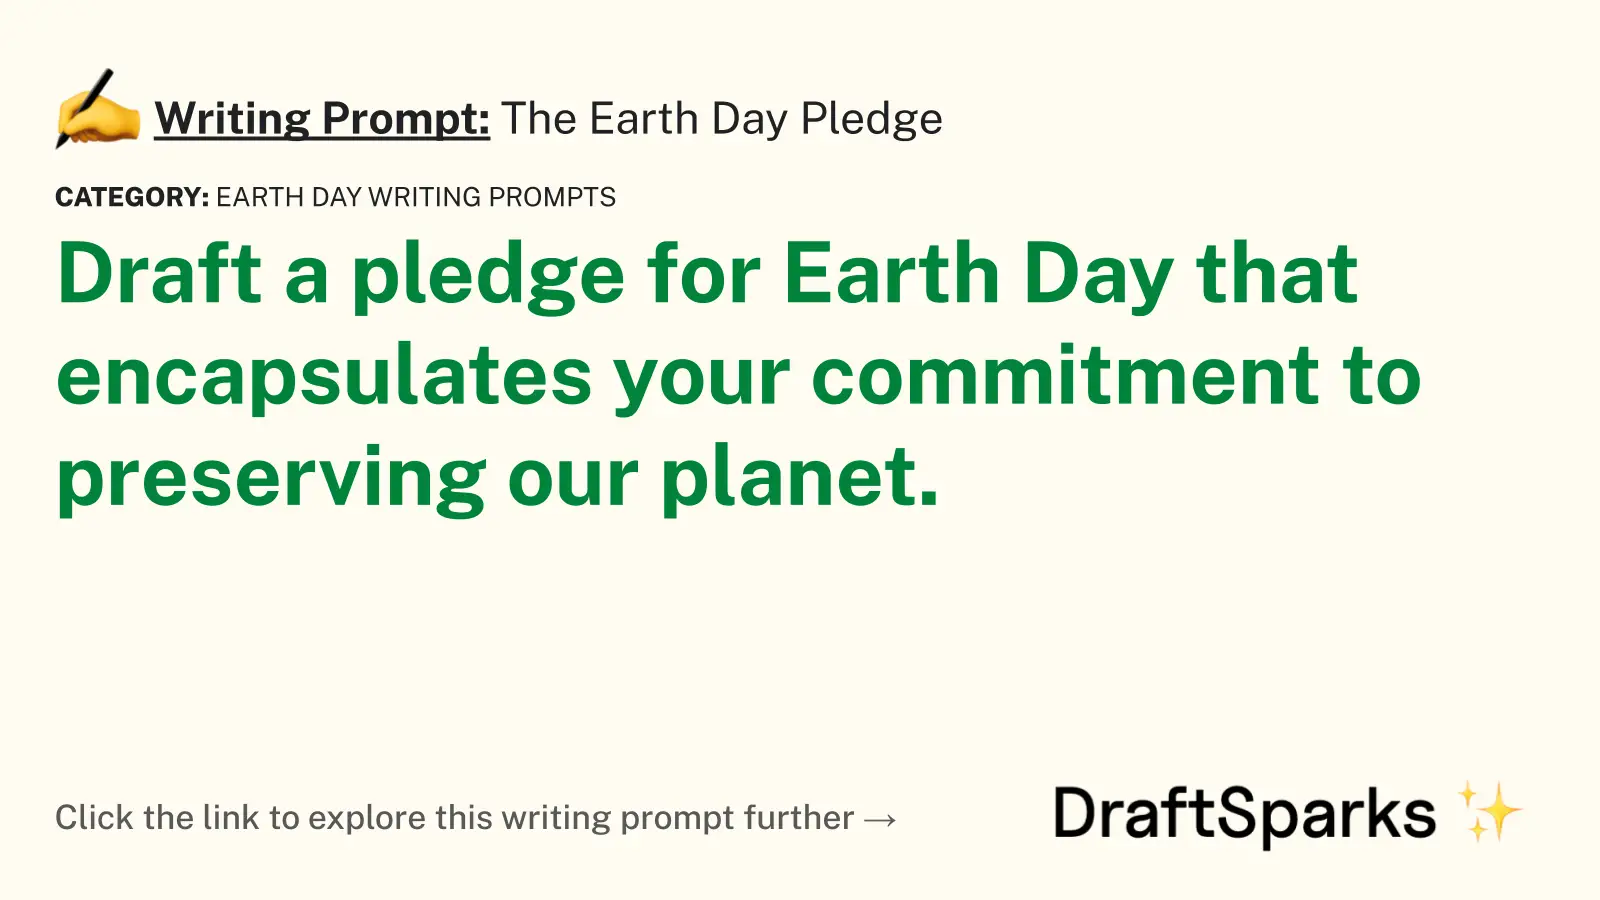 The Earth Day Pledge